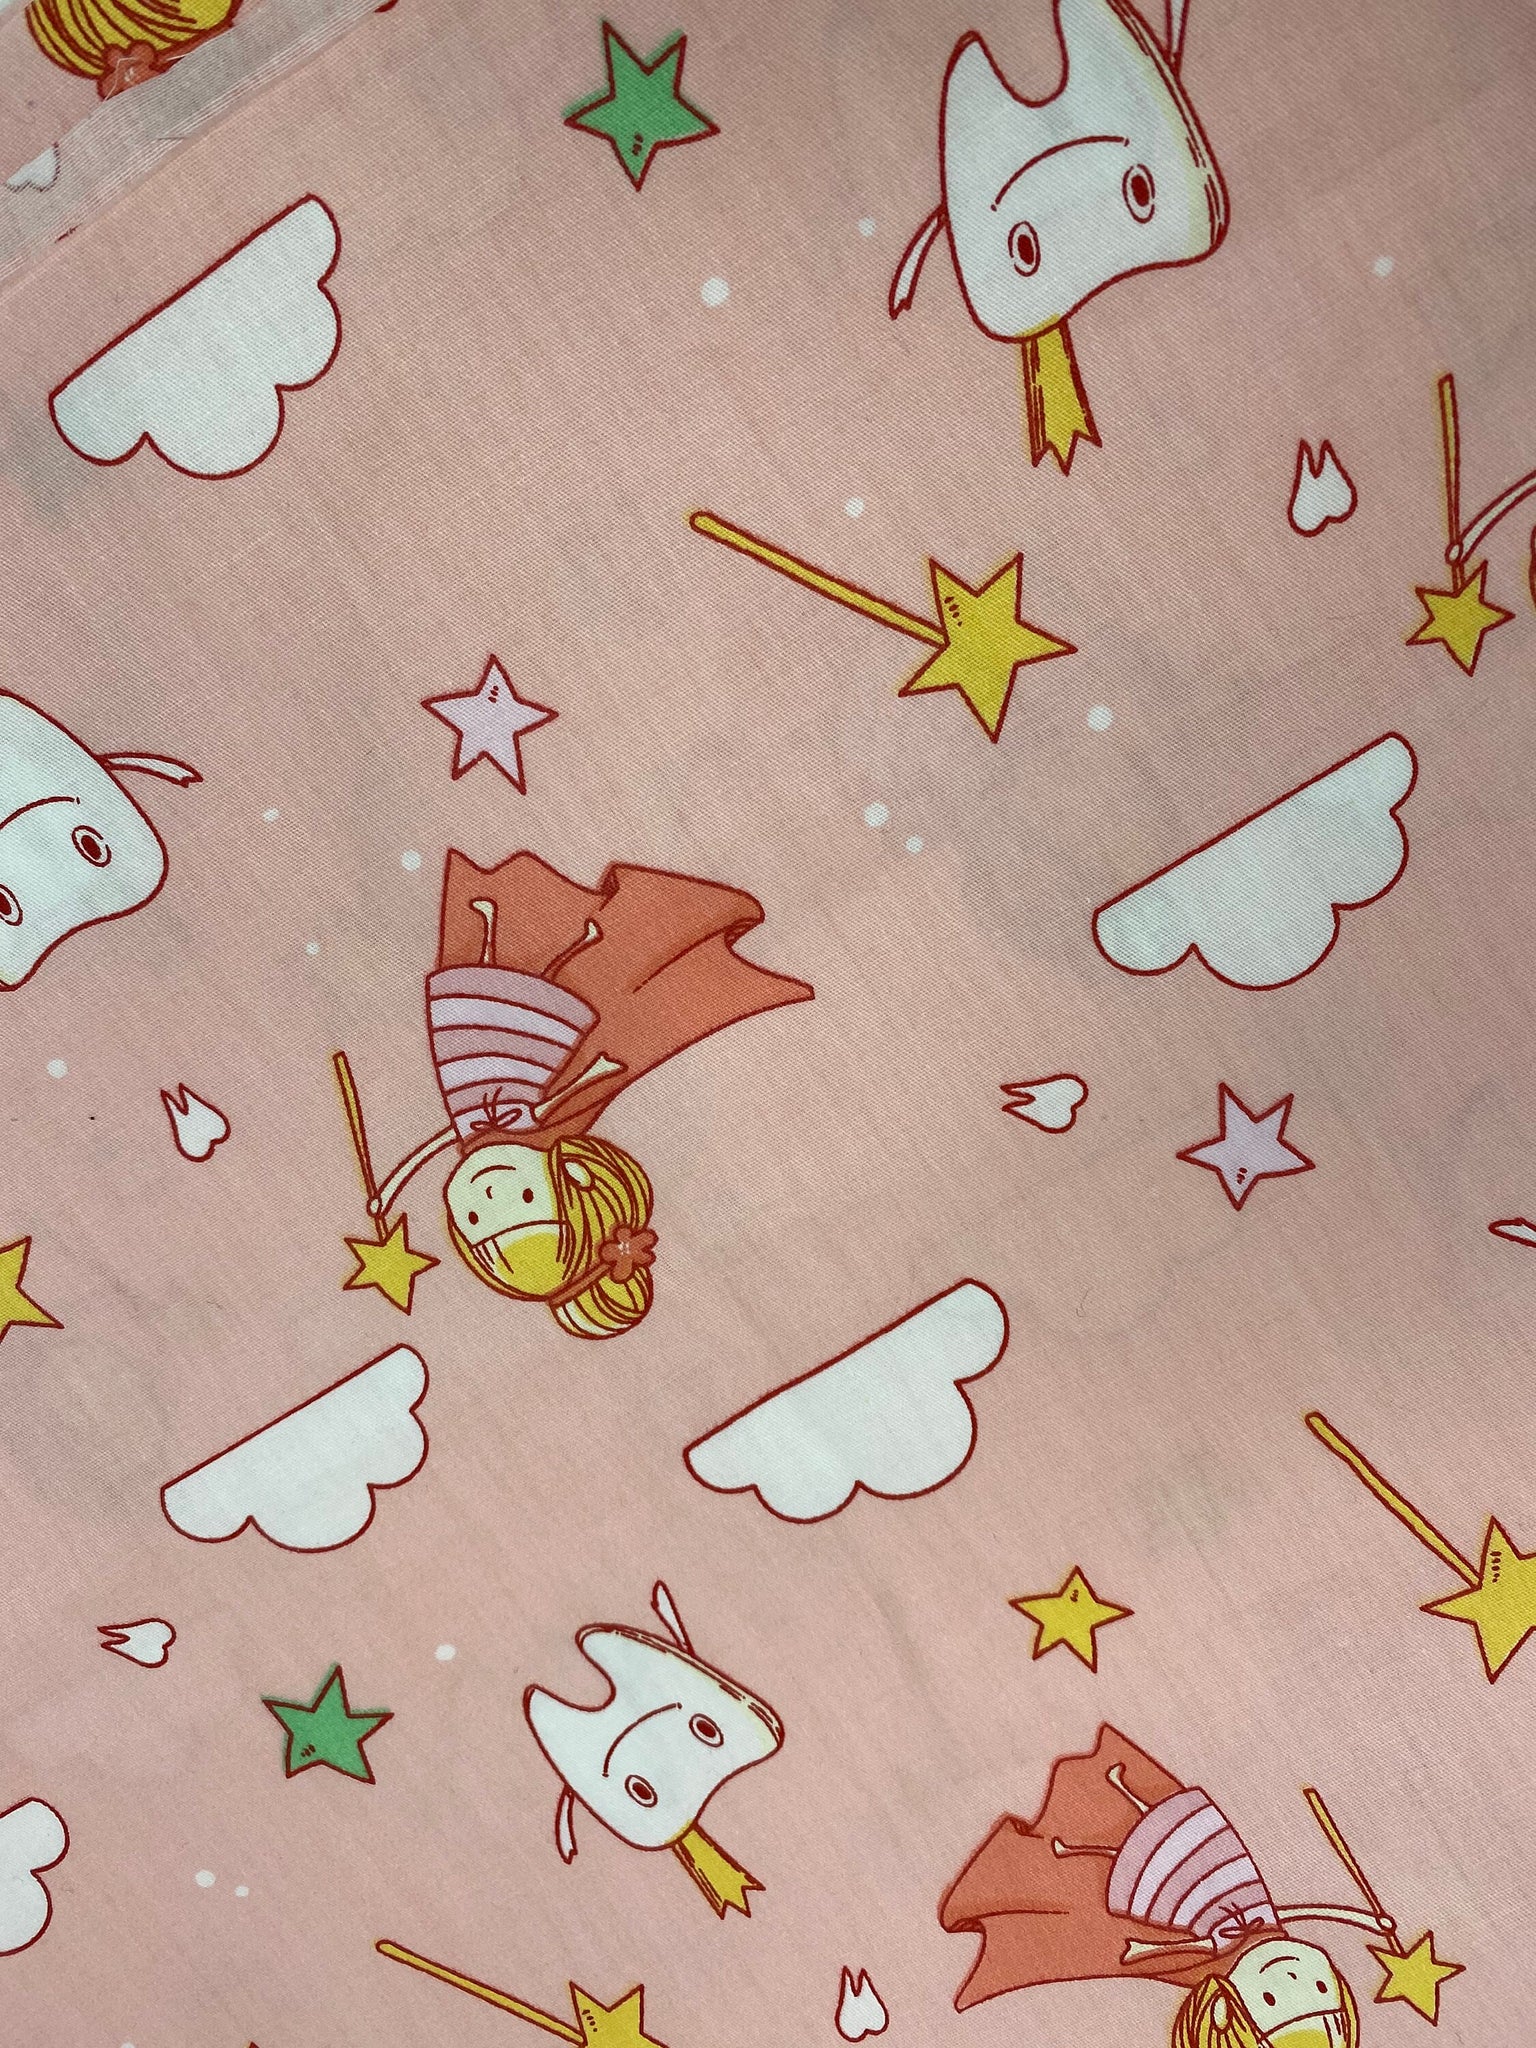 NEW "Tooth Fairy", 100% Ribbed Cotton Fabric, Boutique Fabric, Custom Made Kids Fabric for Masks, Accessories, Bedding & More, 1 Yard